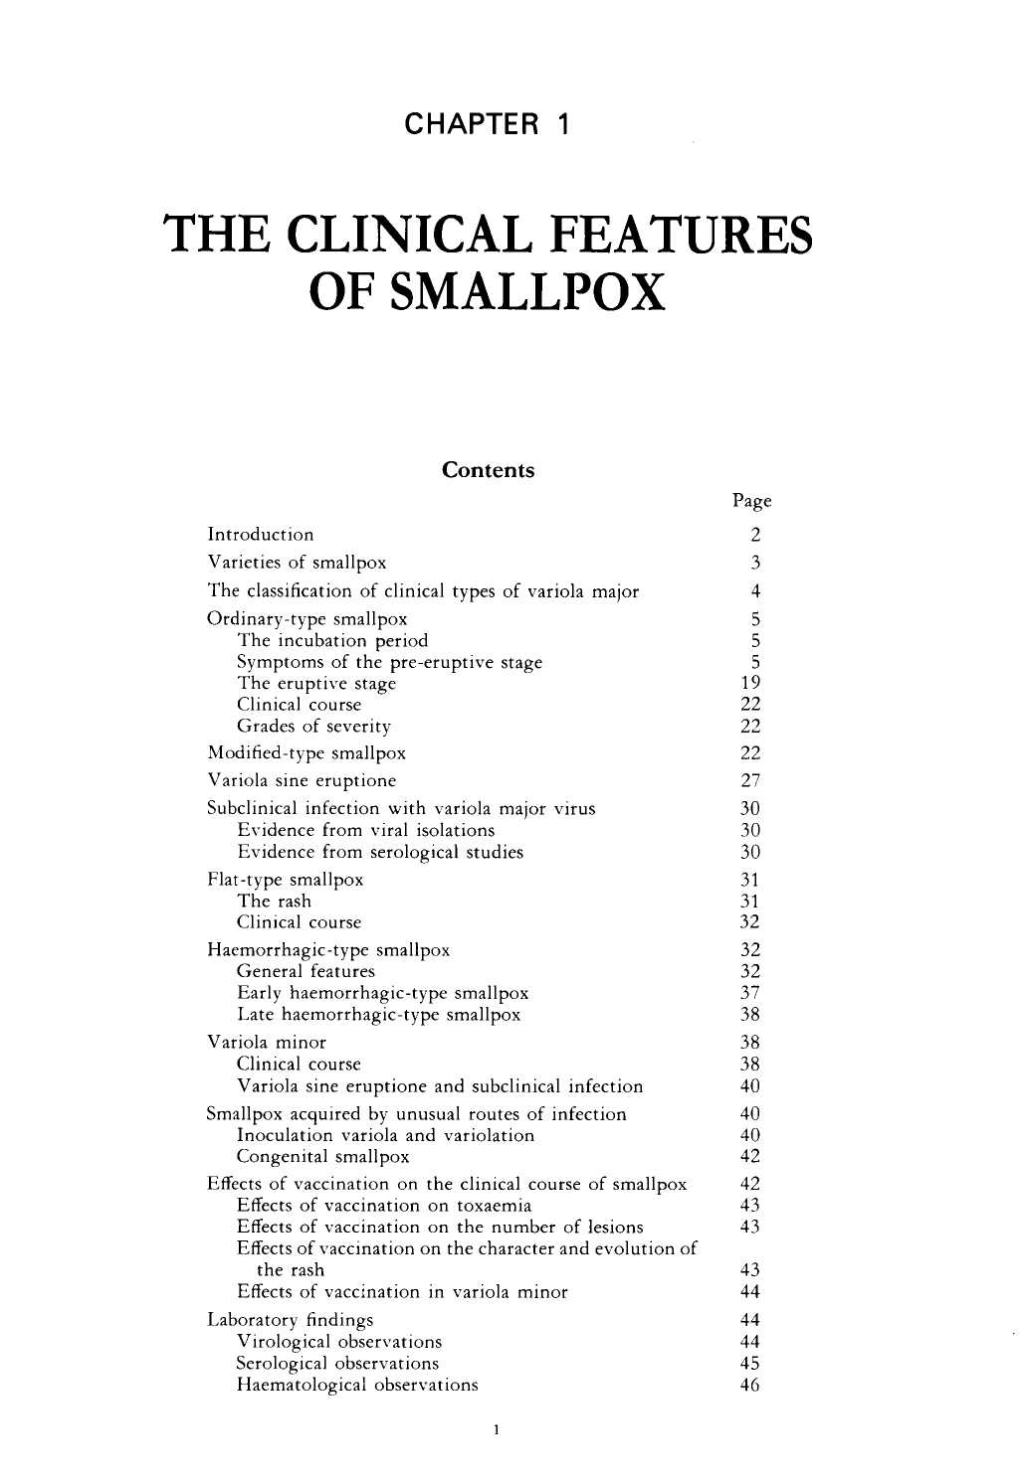 The Clinical Features of Smallpox